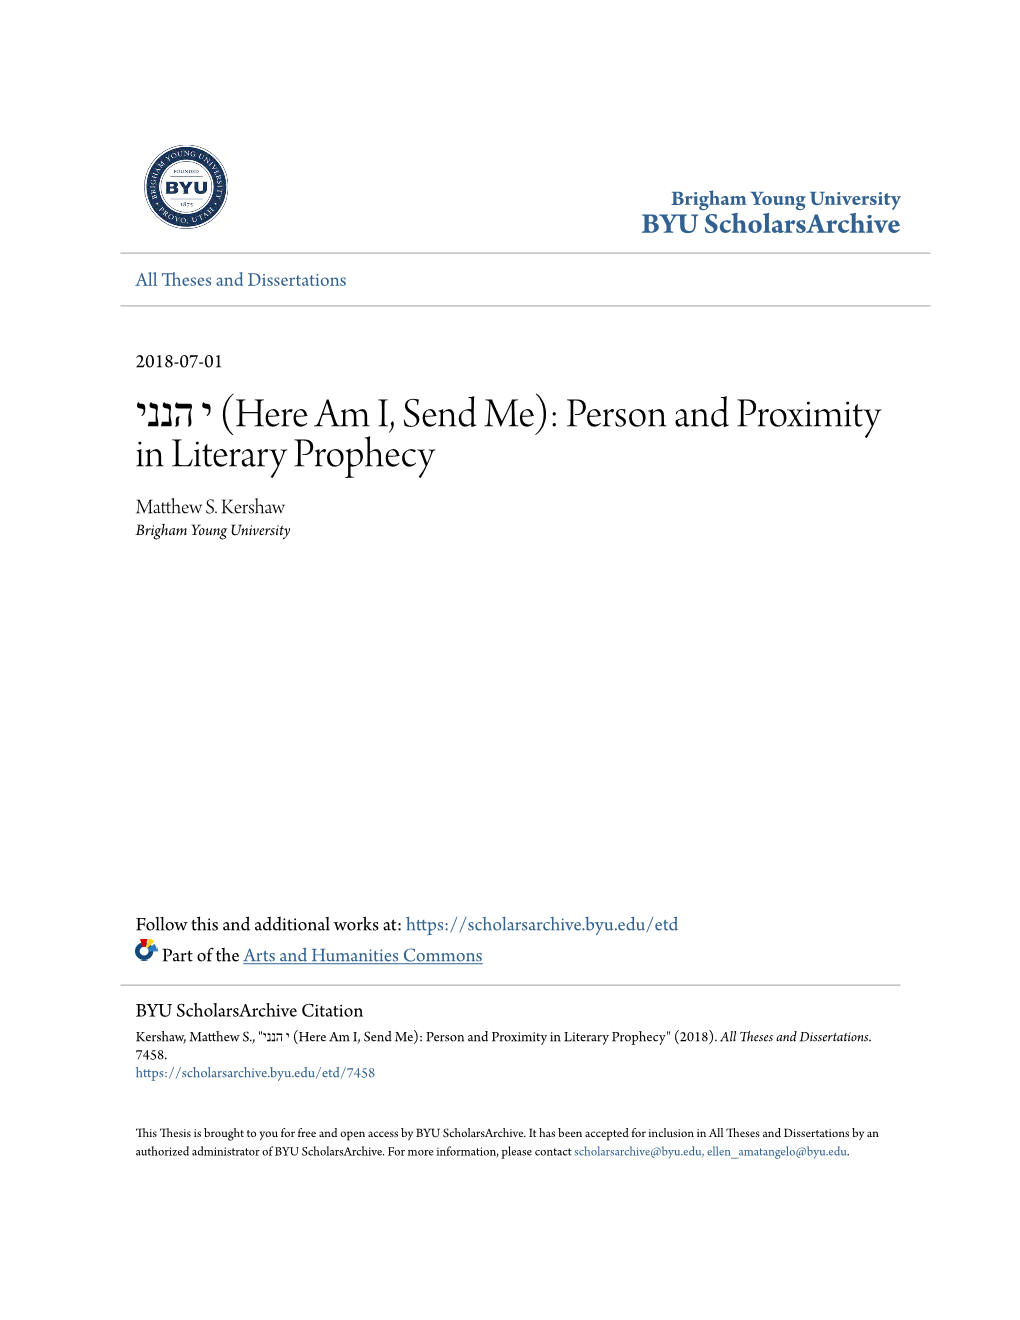 Person and Proximity in Literary Prophecy" (2018)